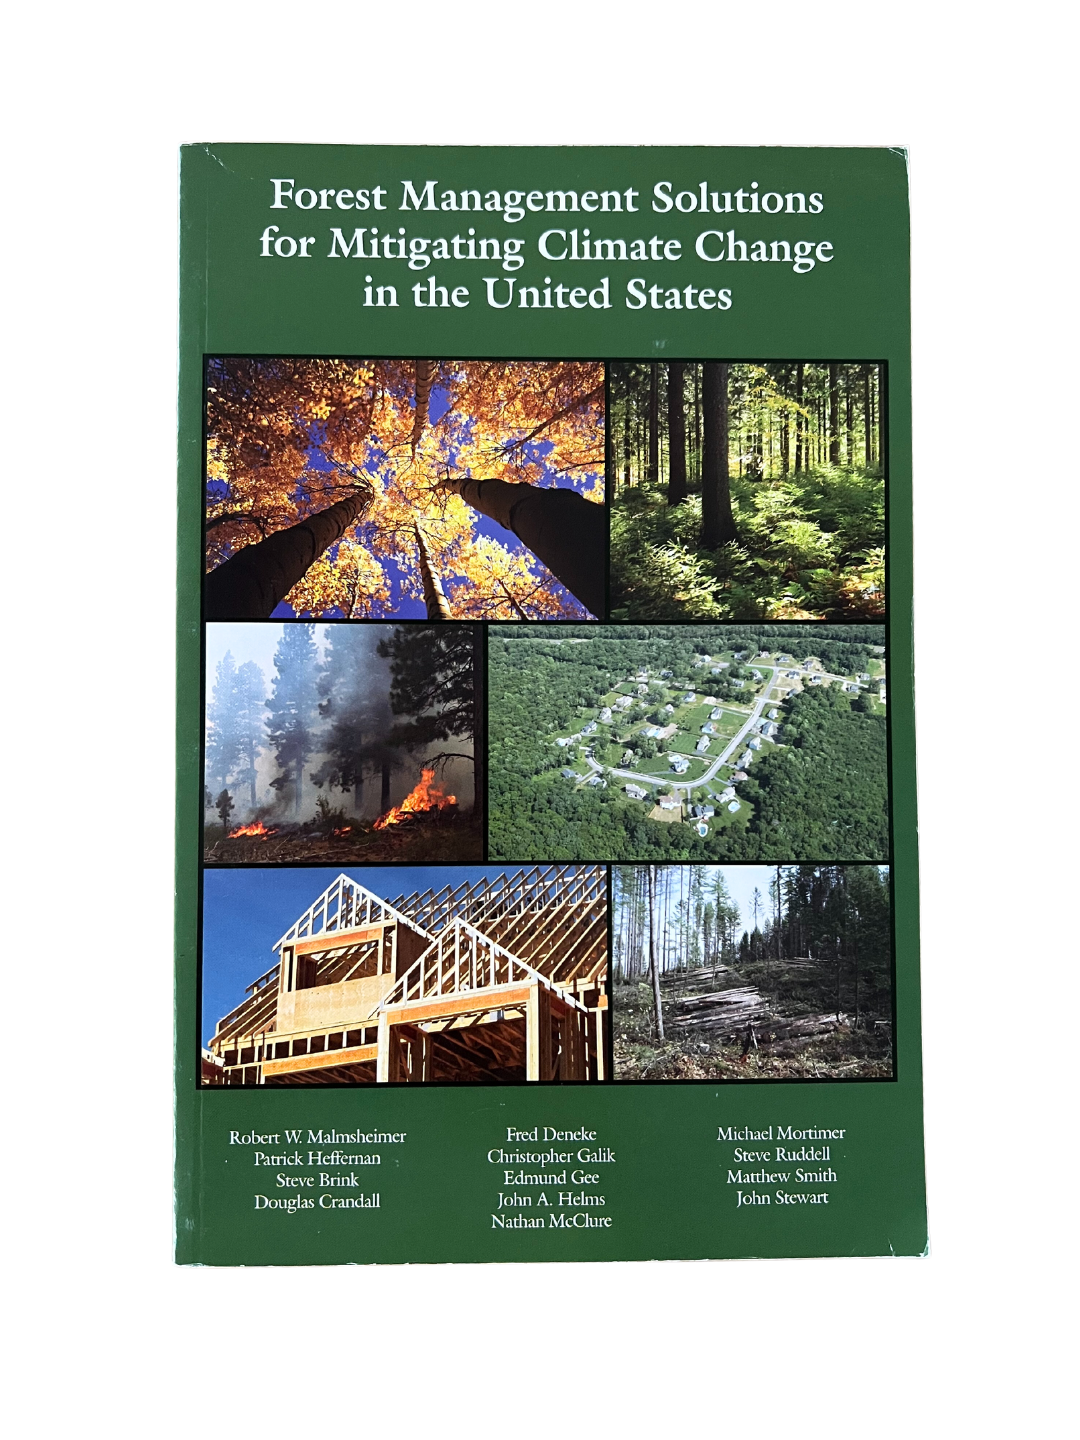 Forest Management Solutions for Mitigating Climate Change